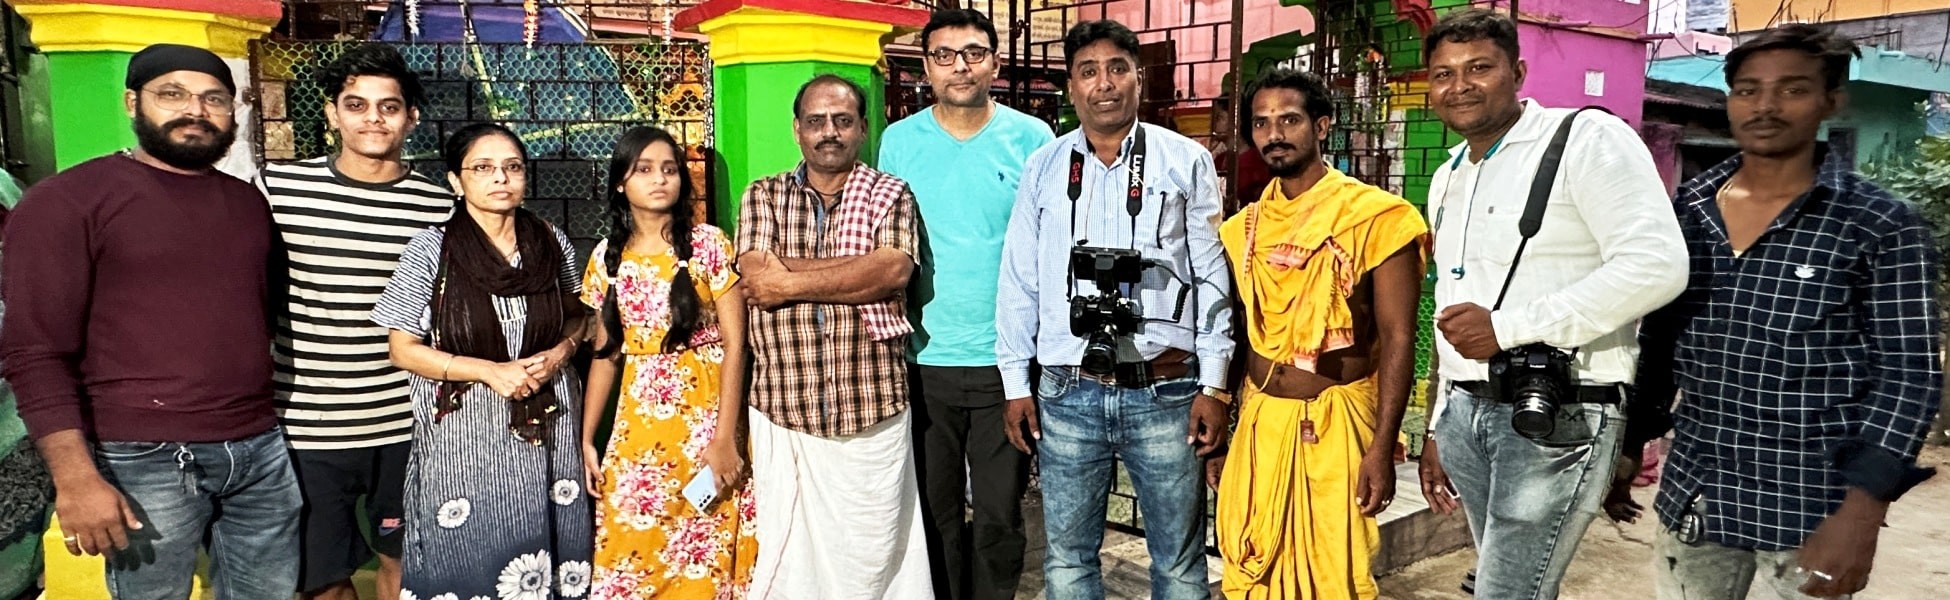 film production services in india, film production services in uttar pradesh, film production services in varanasi, video production services in india, video production services in uttar pradesh, video production services in varanasi, tv production services in india, tv production services in uttar pradesh, tv production services in varanasi, production services in india, production services in uttar pradesh, production services in varanasi